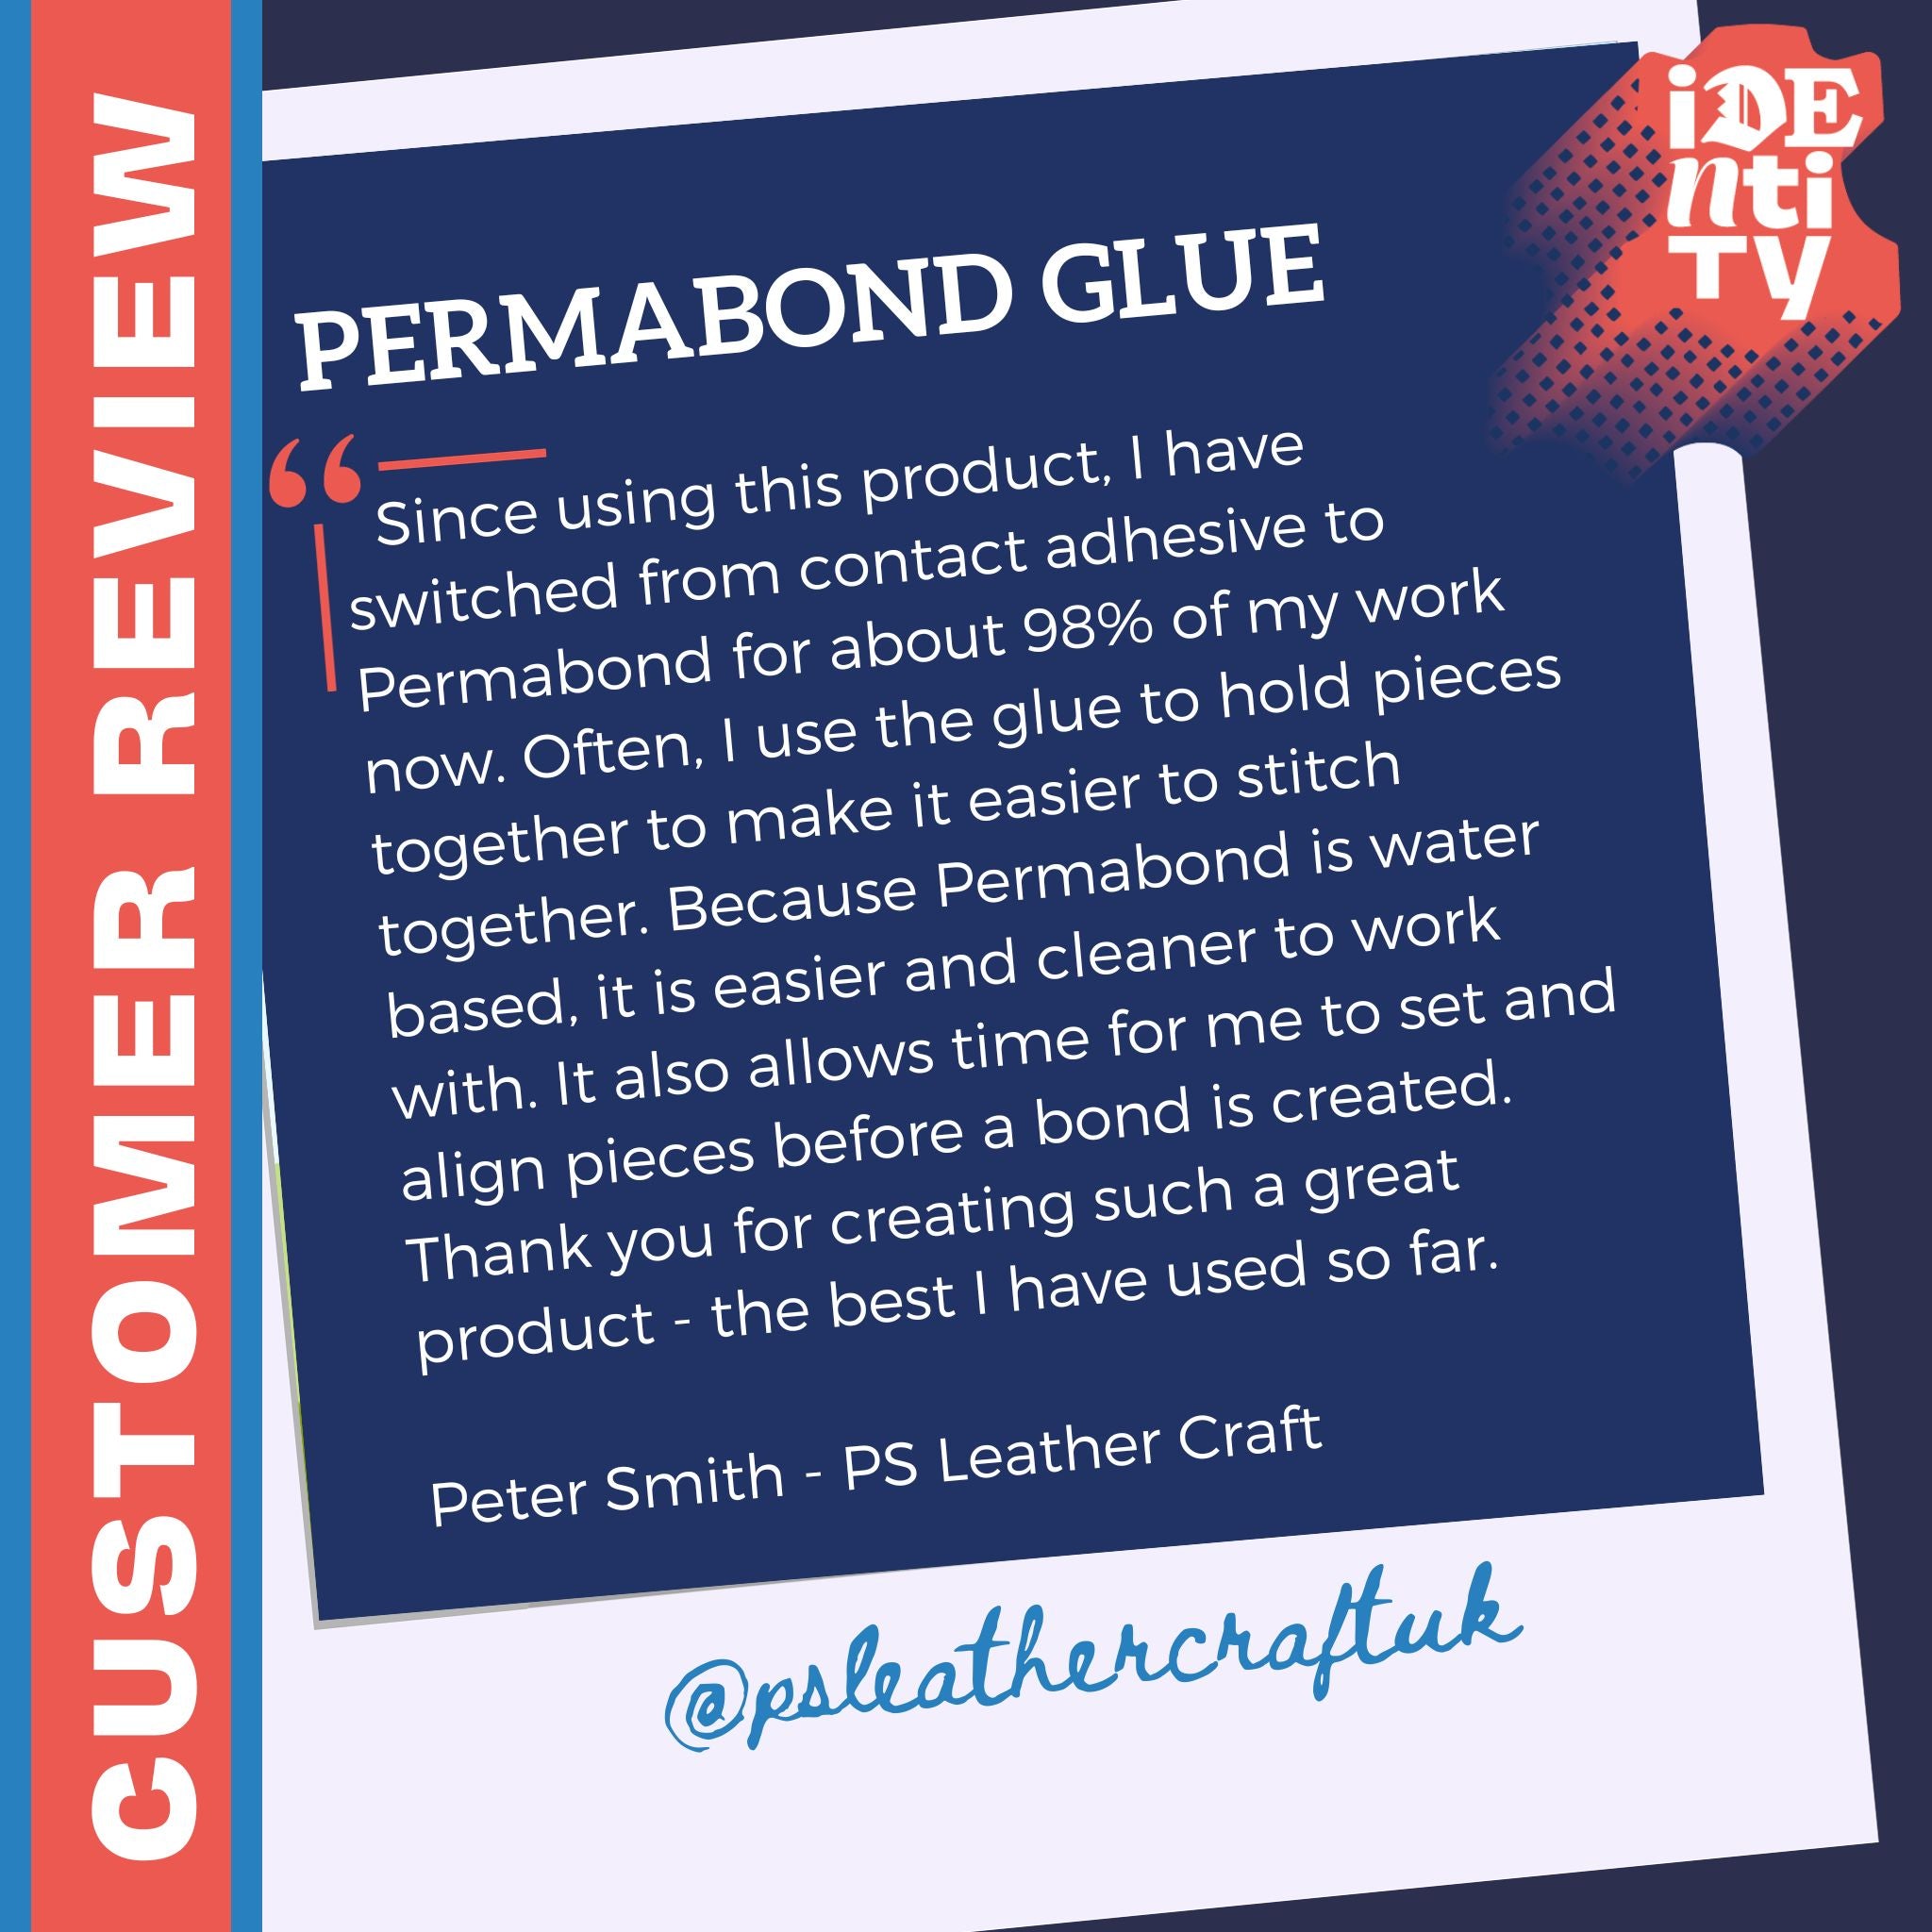 Customer review of the Permabond leather glue from P S Leather Craft - https://www.psleathers.com/